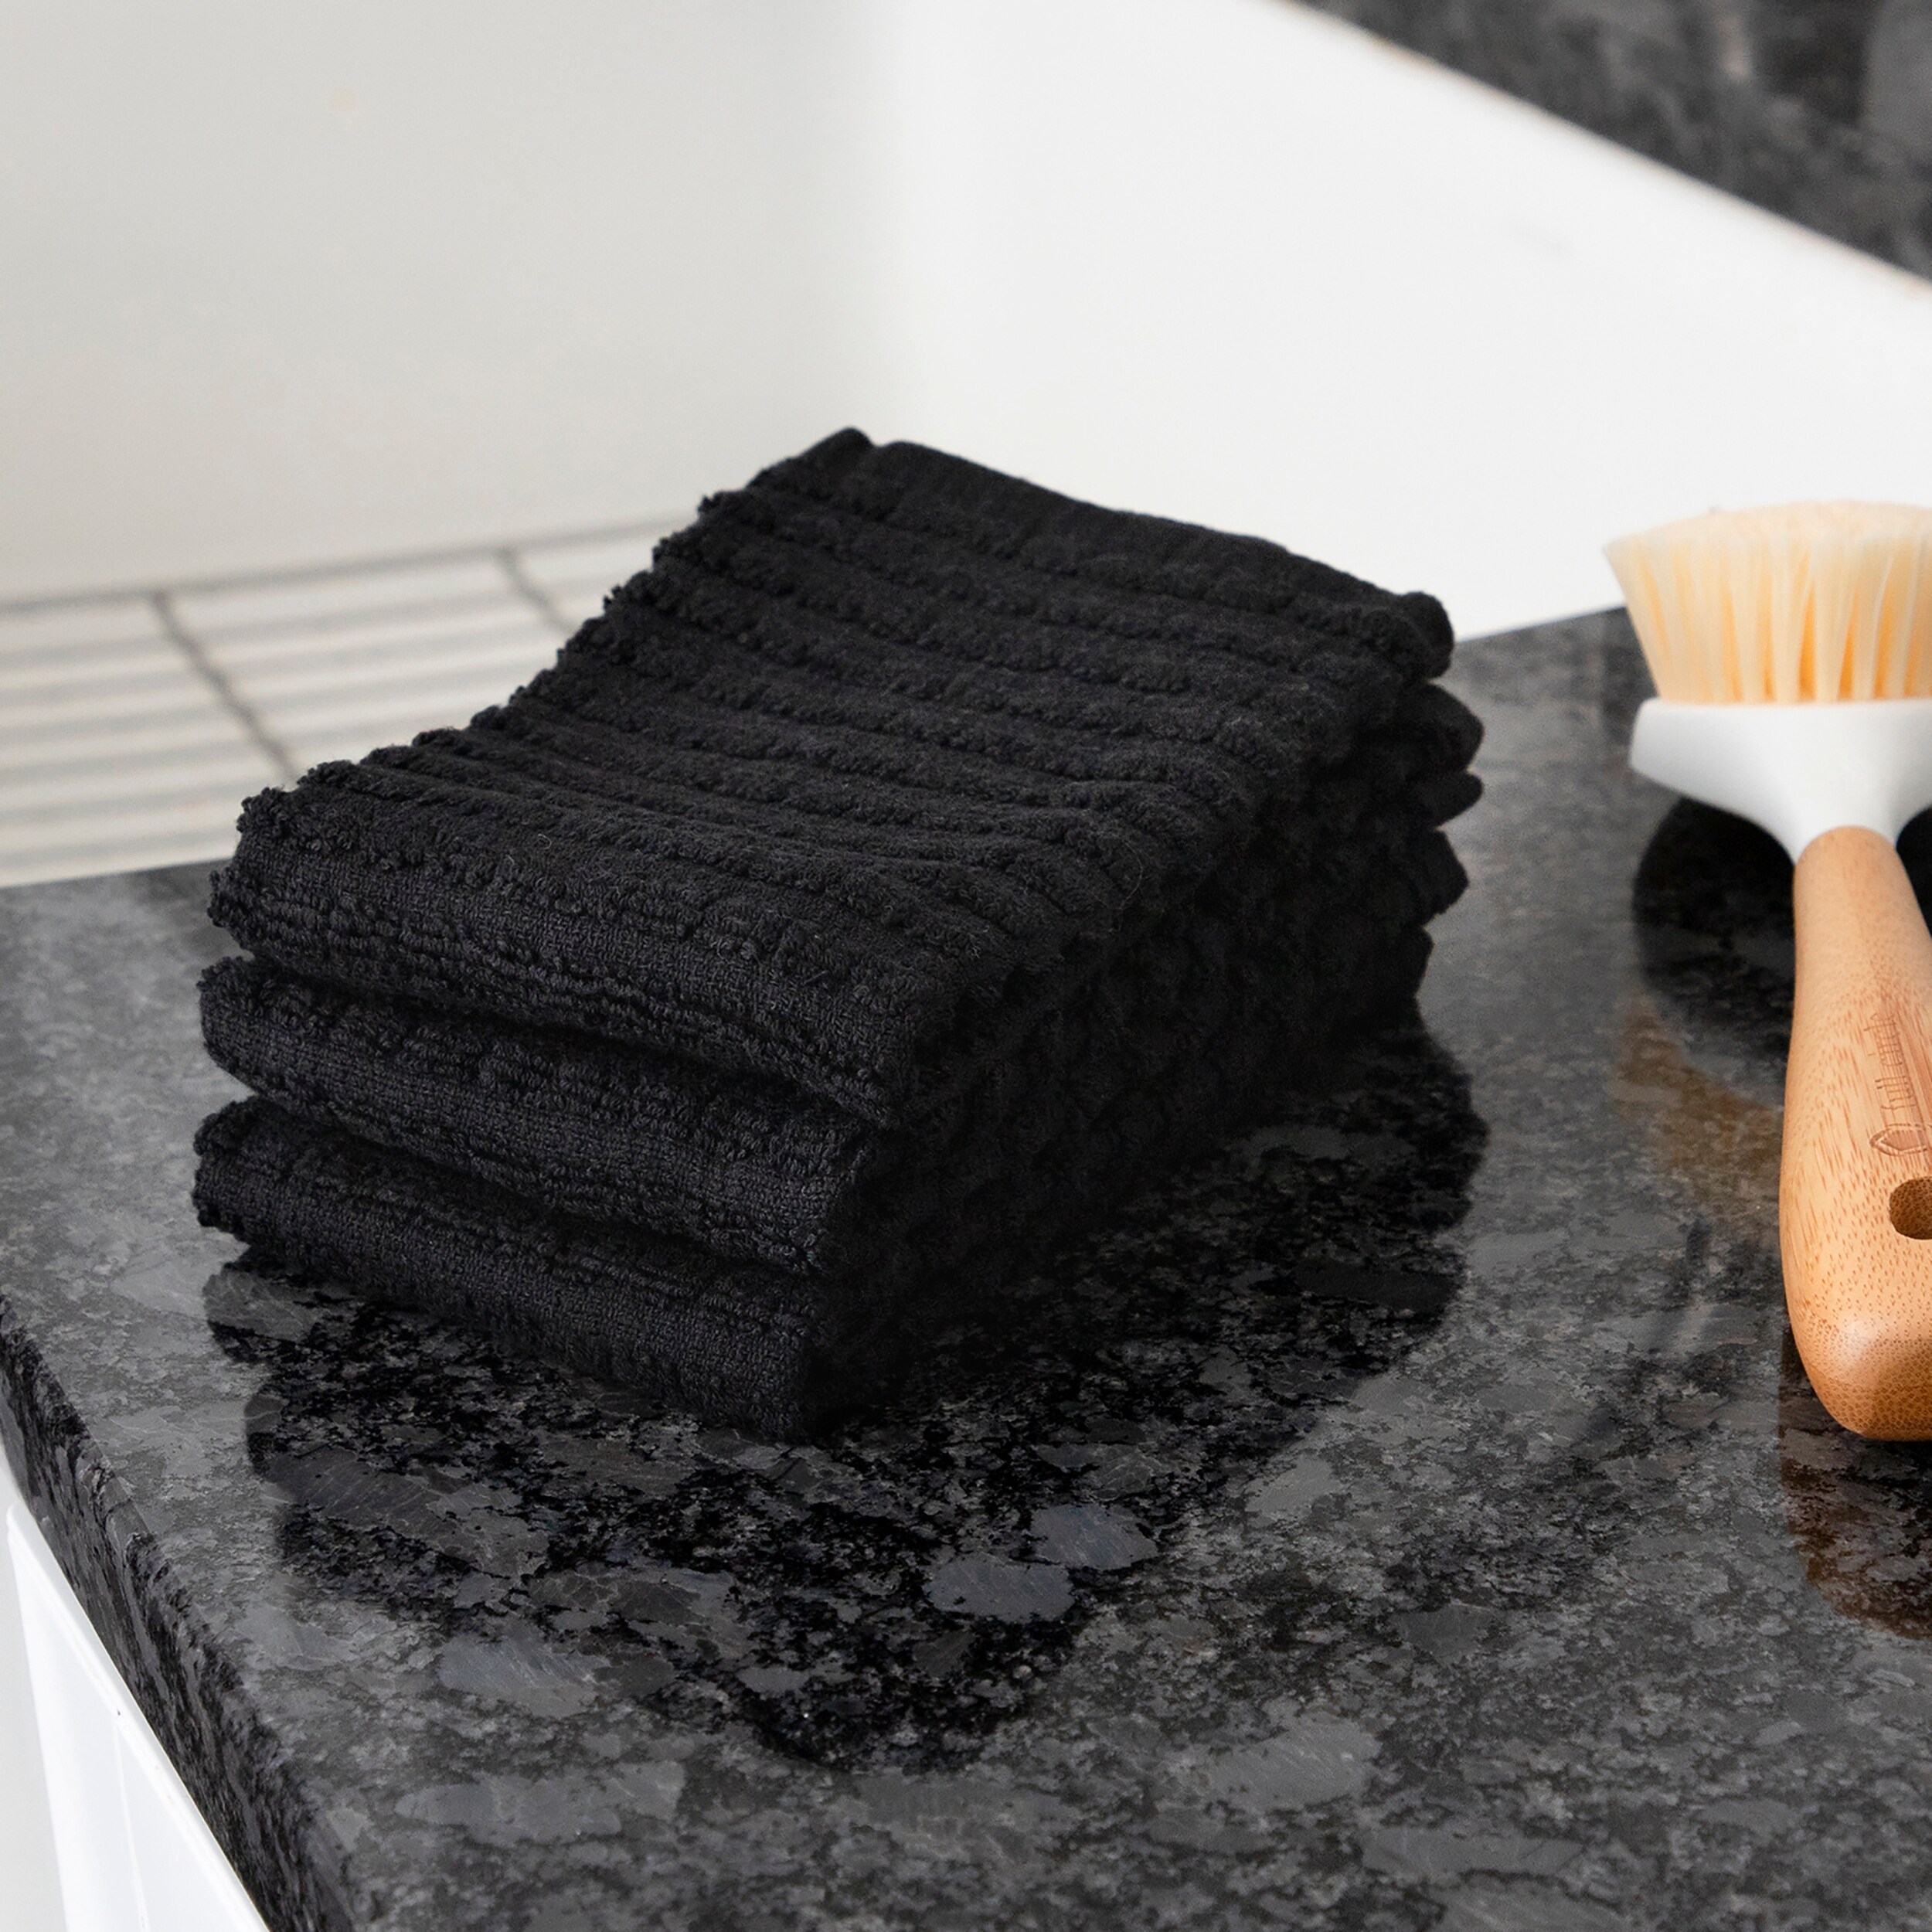 https://ak1.ostkcdn.com/images/products/is/images/direct/009faff5a06084cdeed0bc635d7b2df8e0d0f762/Royale-Solid-Black-Cotton-Dish-Cloths-%28Set-of-3%29.jpg